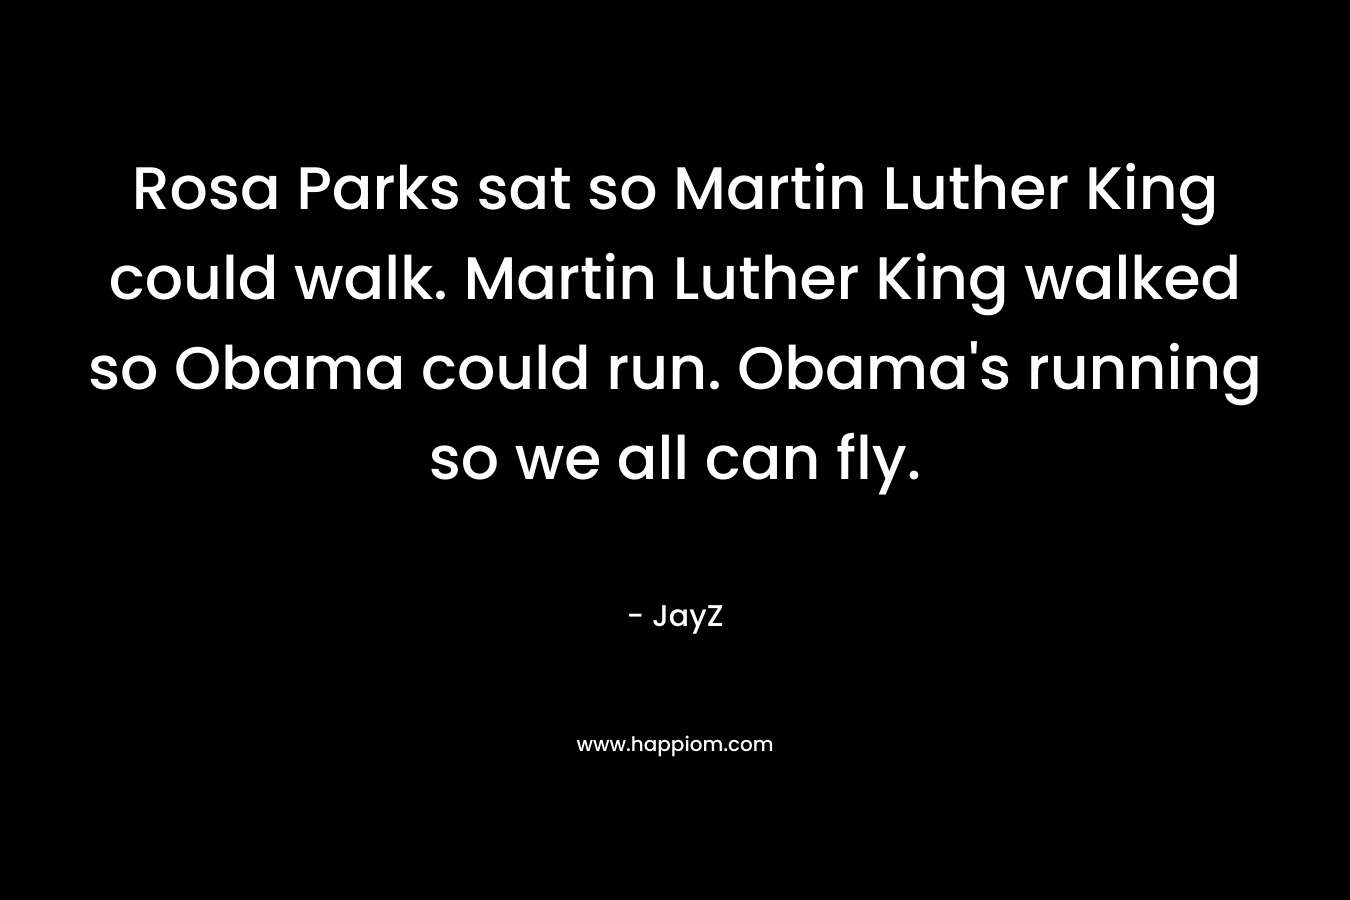 Rosa Parks sat so Martin Luther King could walk. Martin Luther King walked so Obama could run. Obama’s running so we all can fly. – JayZ